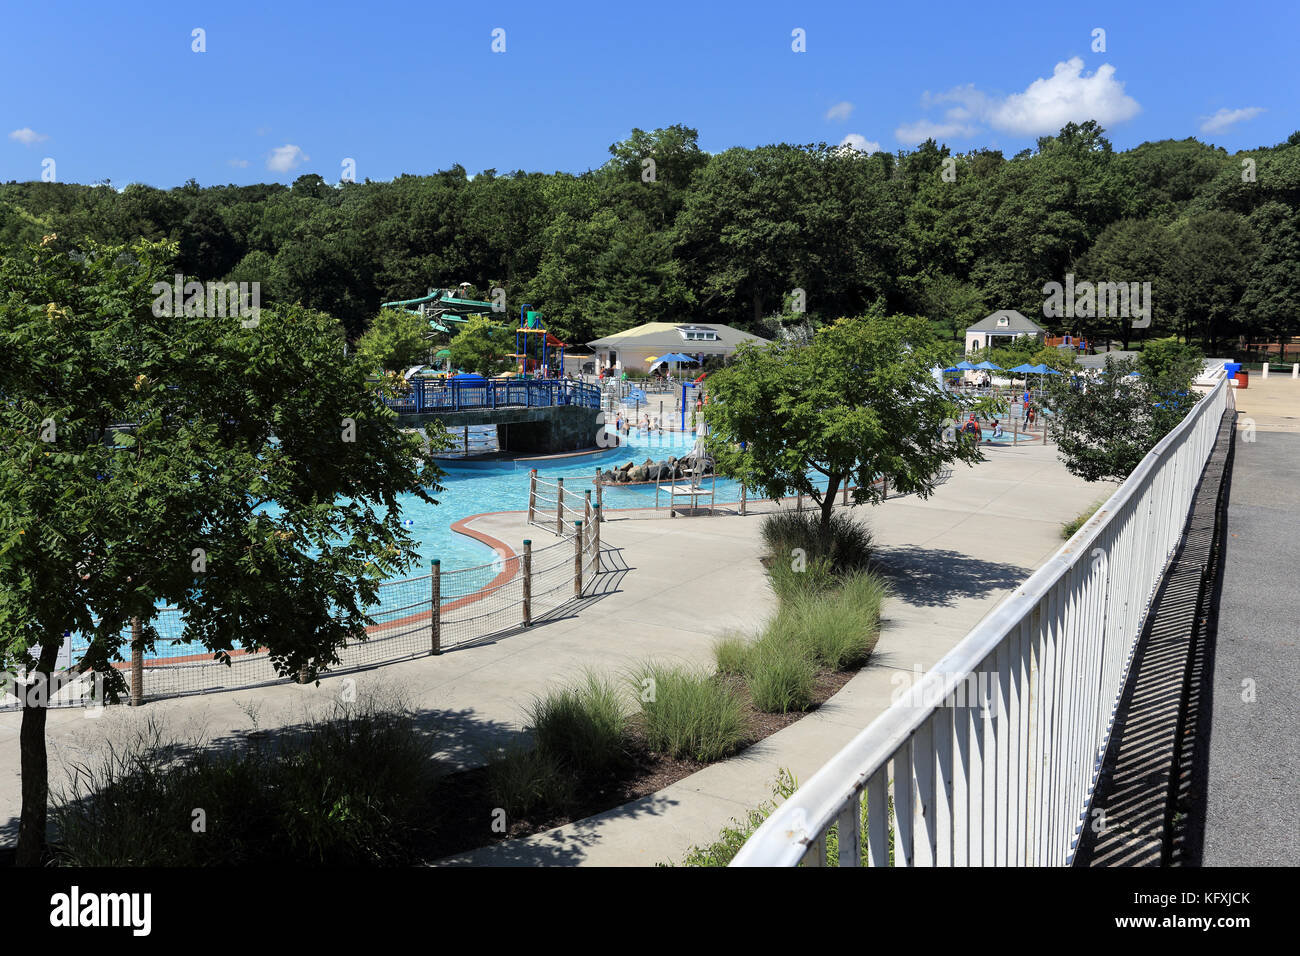 Waterpark at tibbetts Brook park Yonkers New York Stock Photo